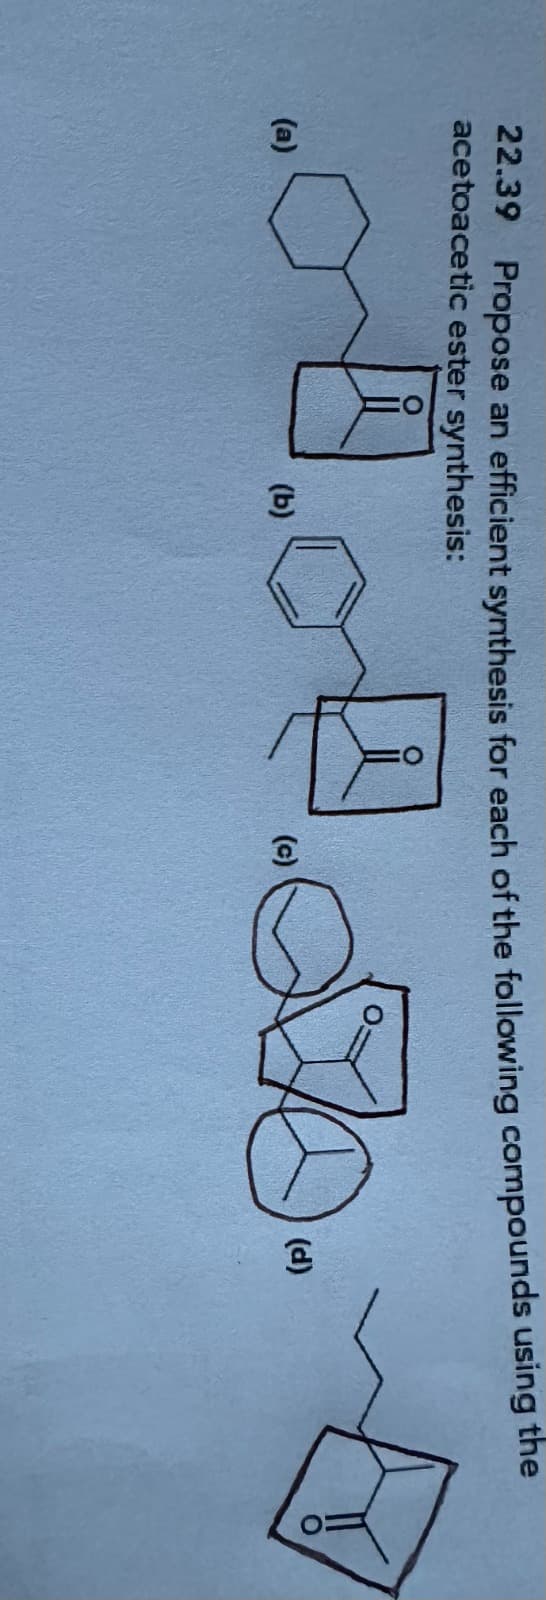 22.39 Propose an efficient synthesis for each of the following compounds using the
acetoacetic ester synthesis:
... 4.70.
(a)
(b)
(c)
(d)